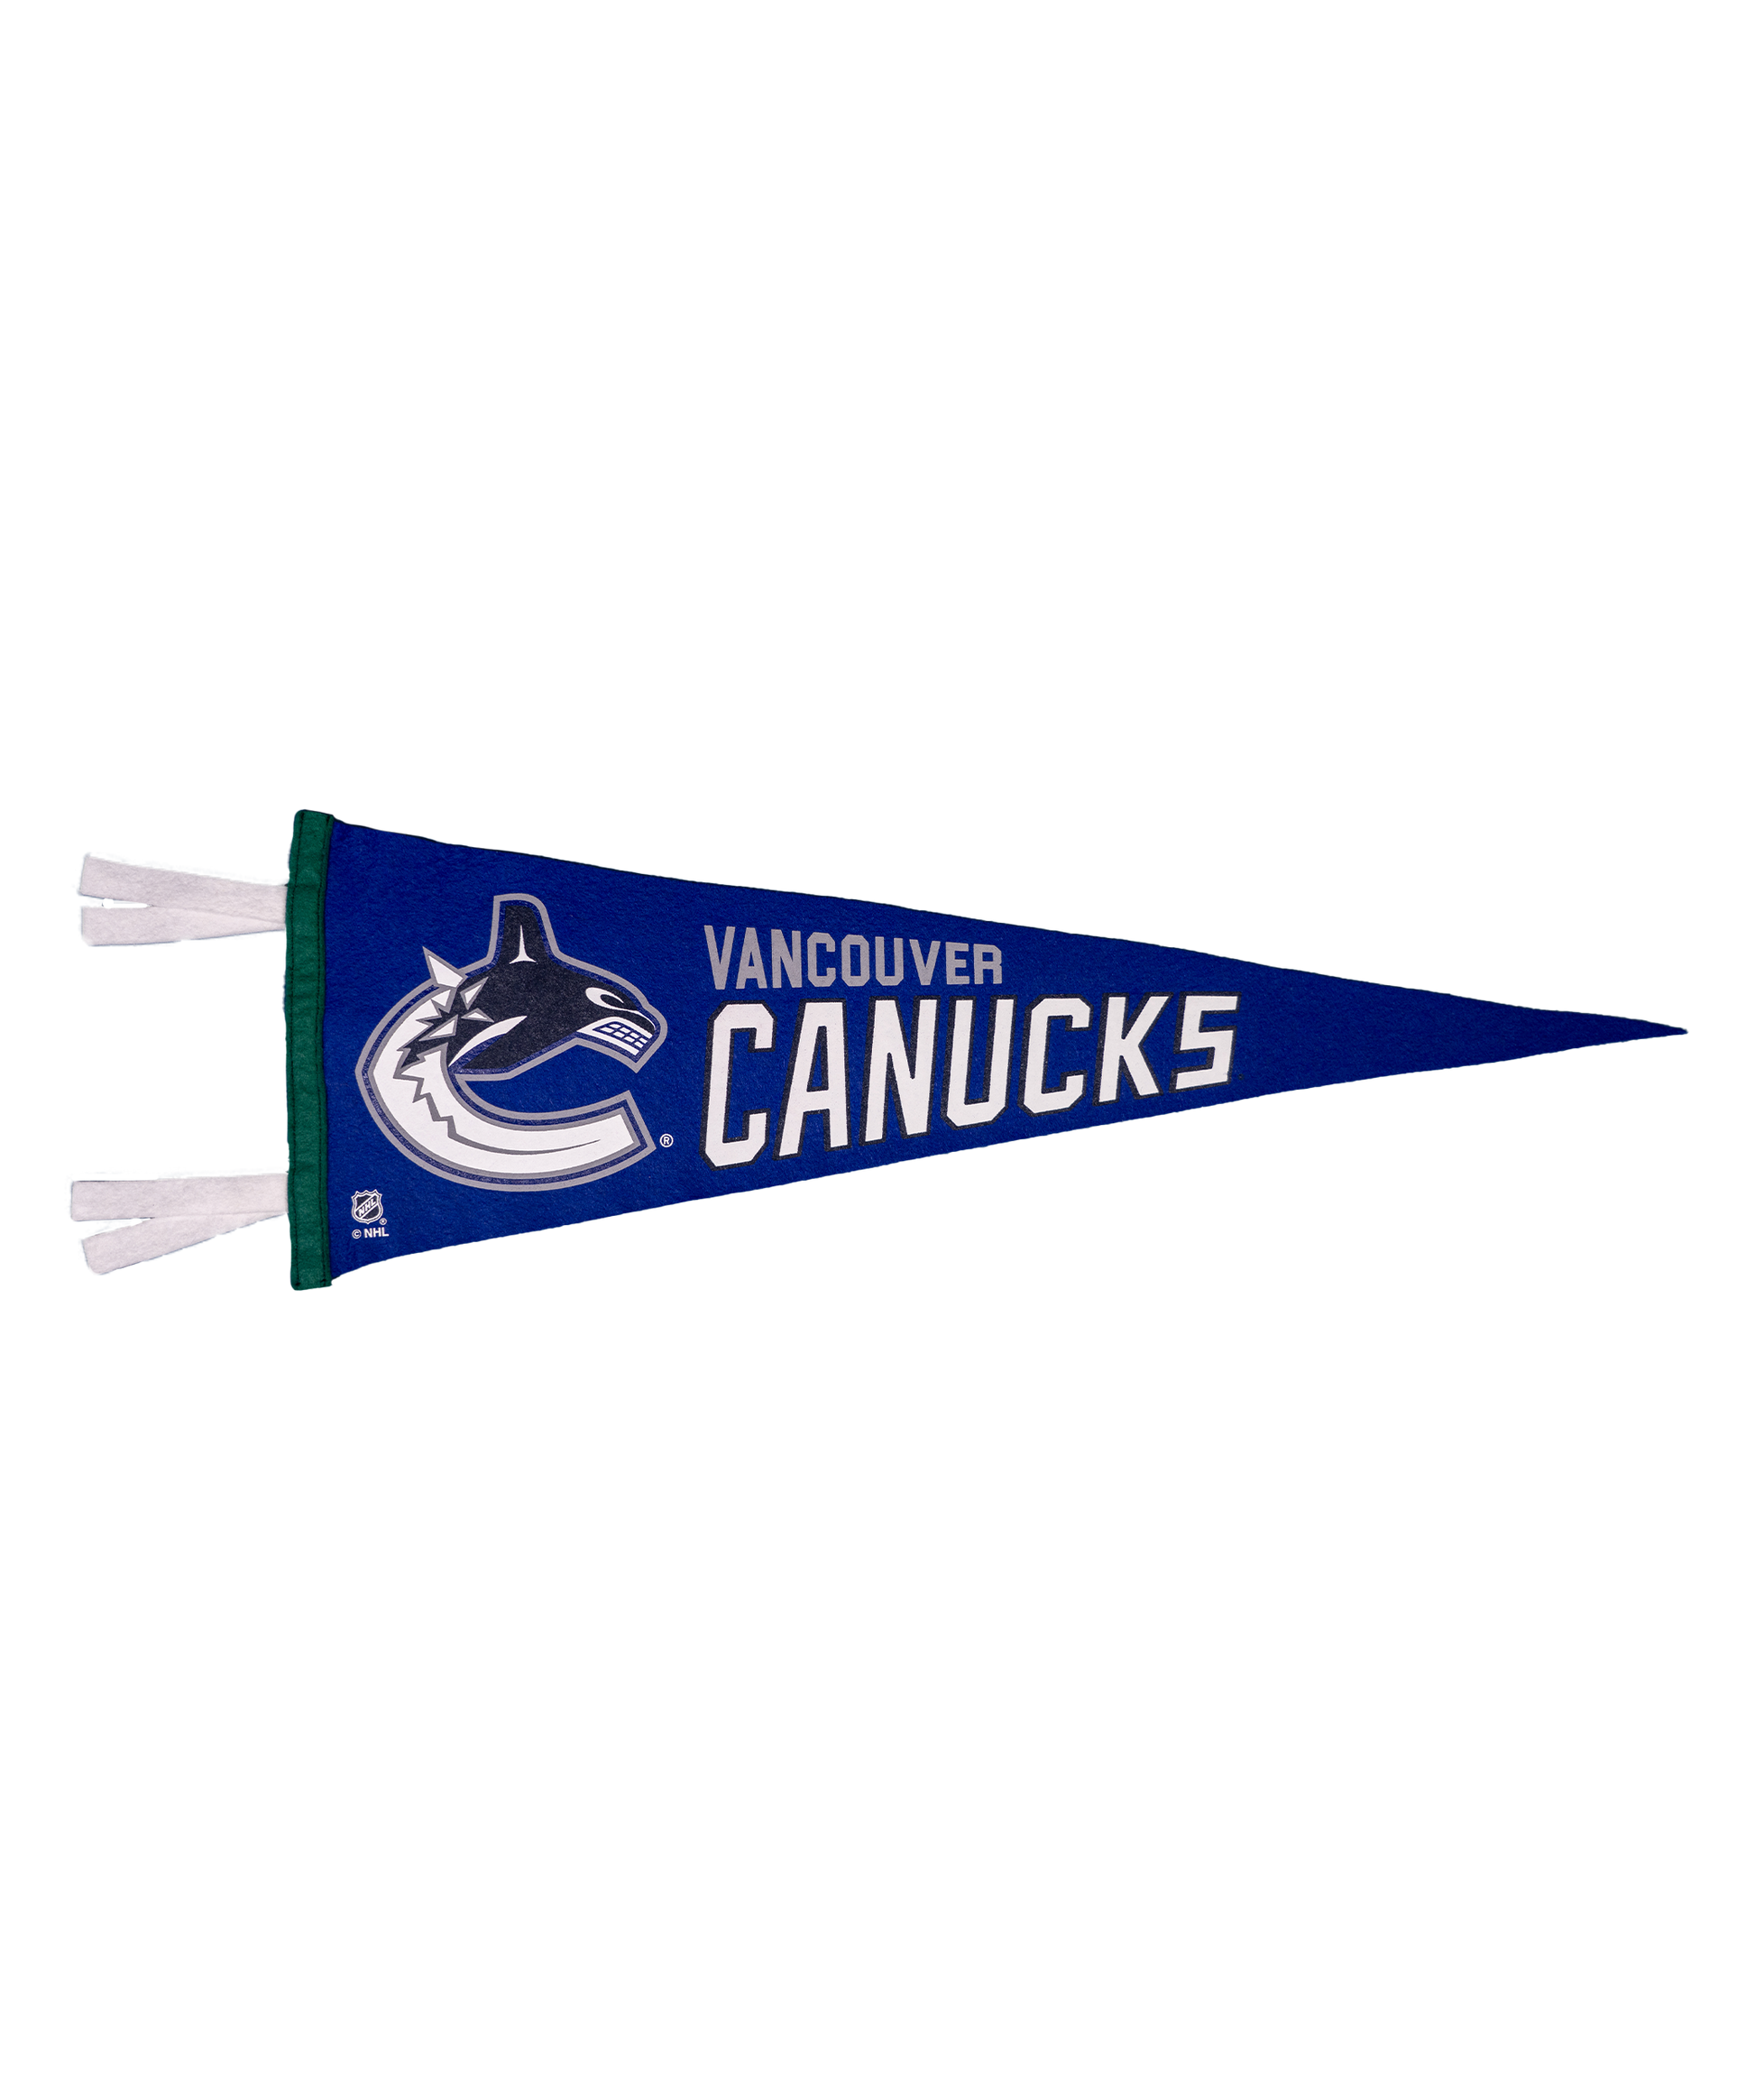 Vancouver Canucks Pennant | NHL x Oxford Pennant